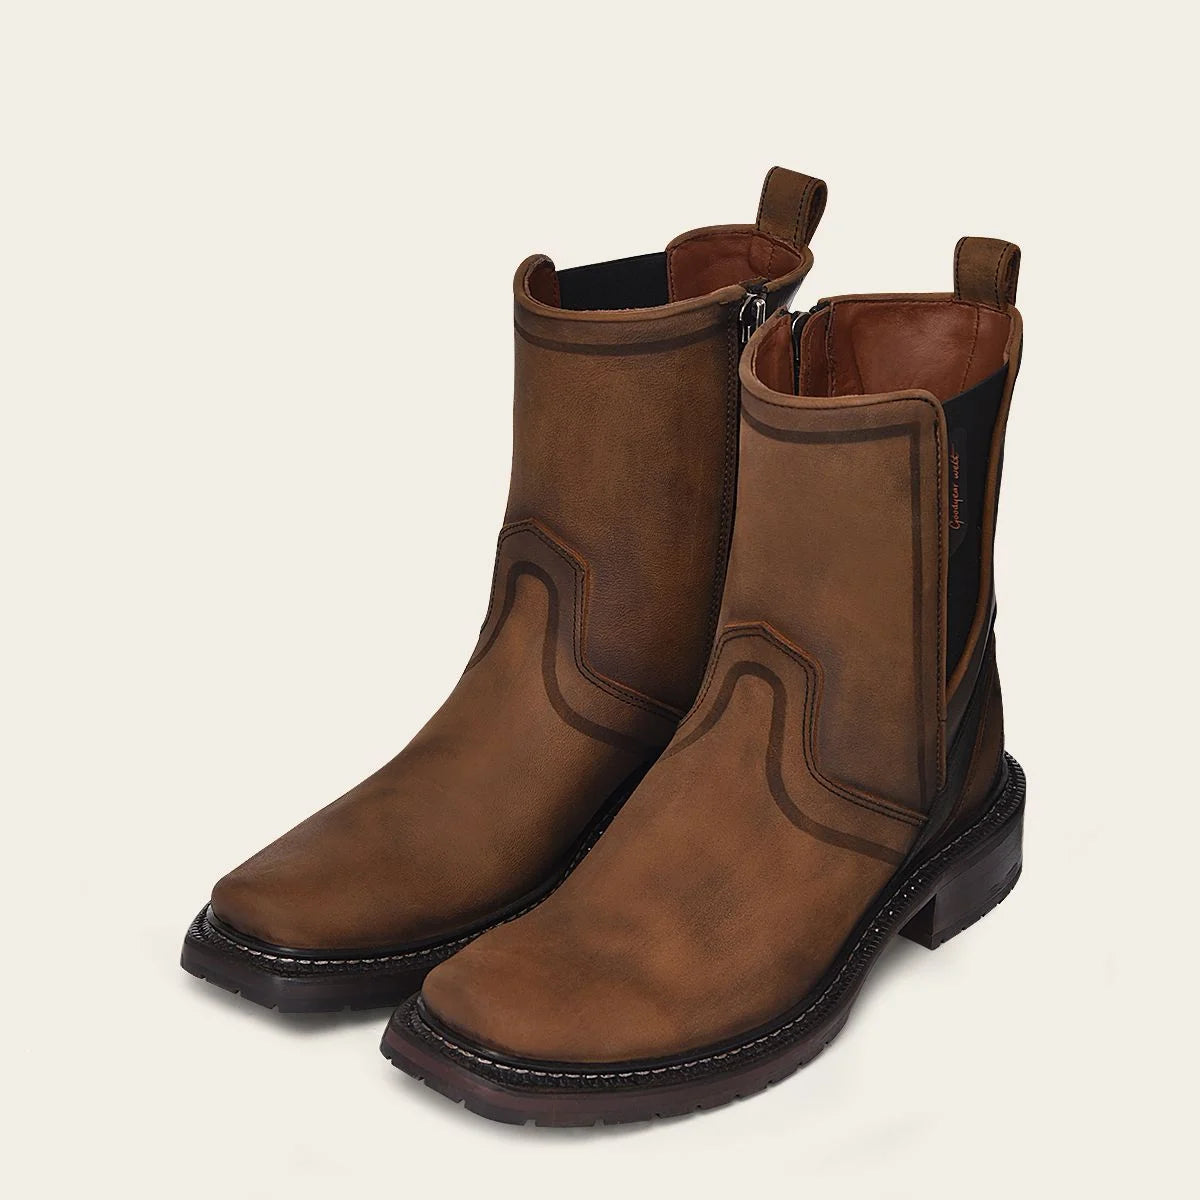 Brown urban boots with matte finish and rubber sole